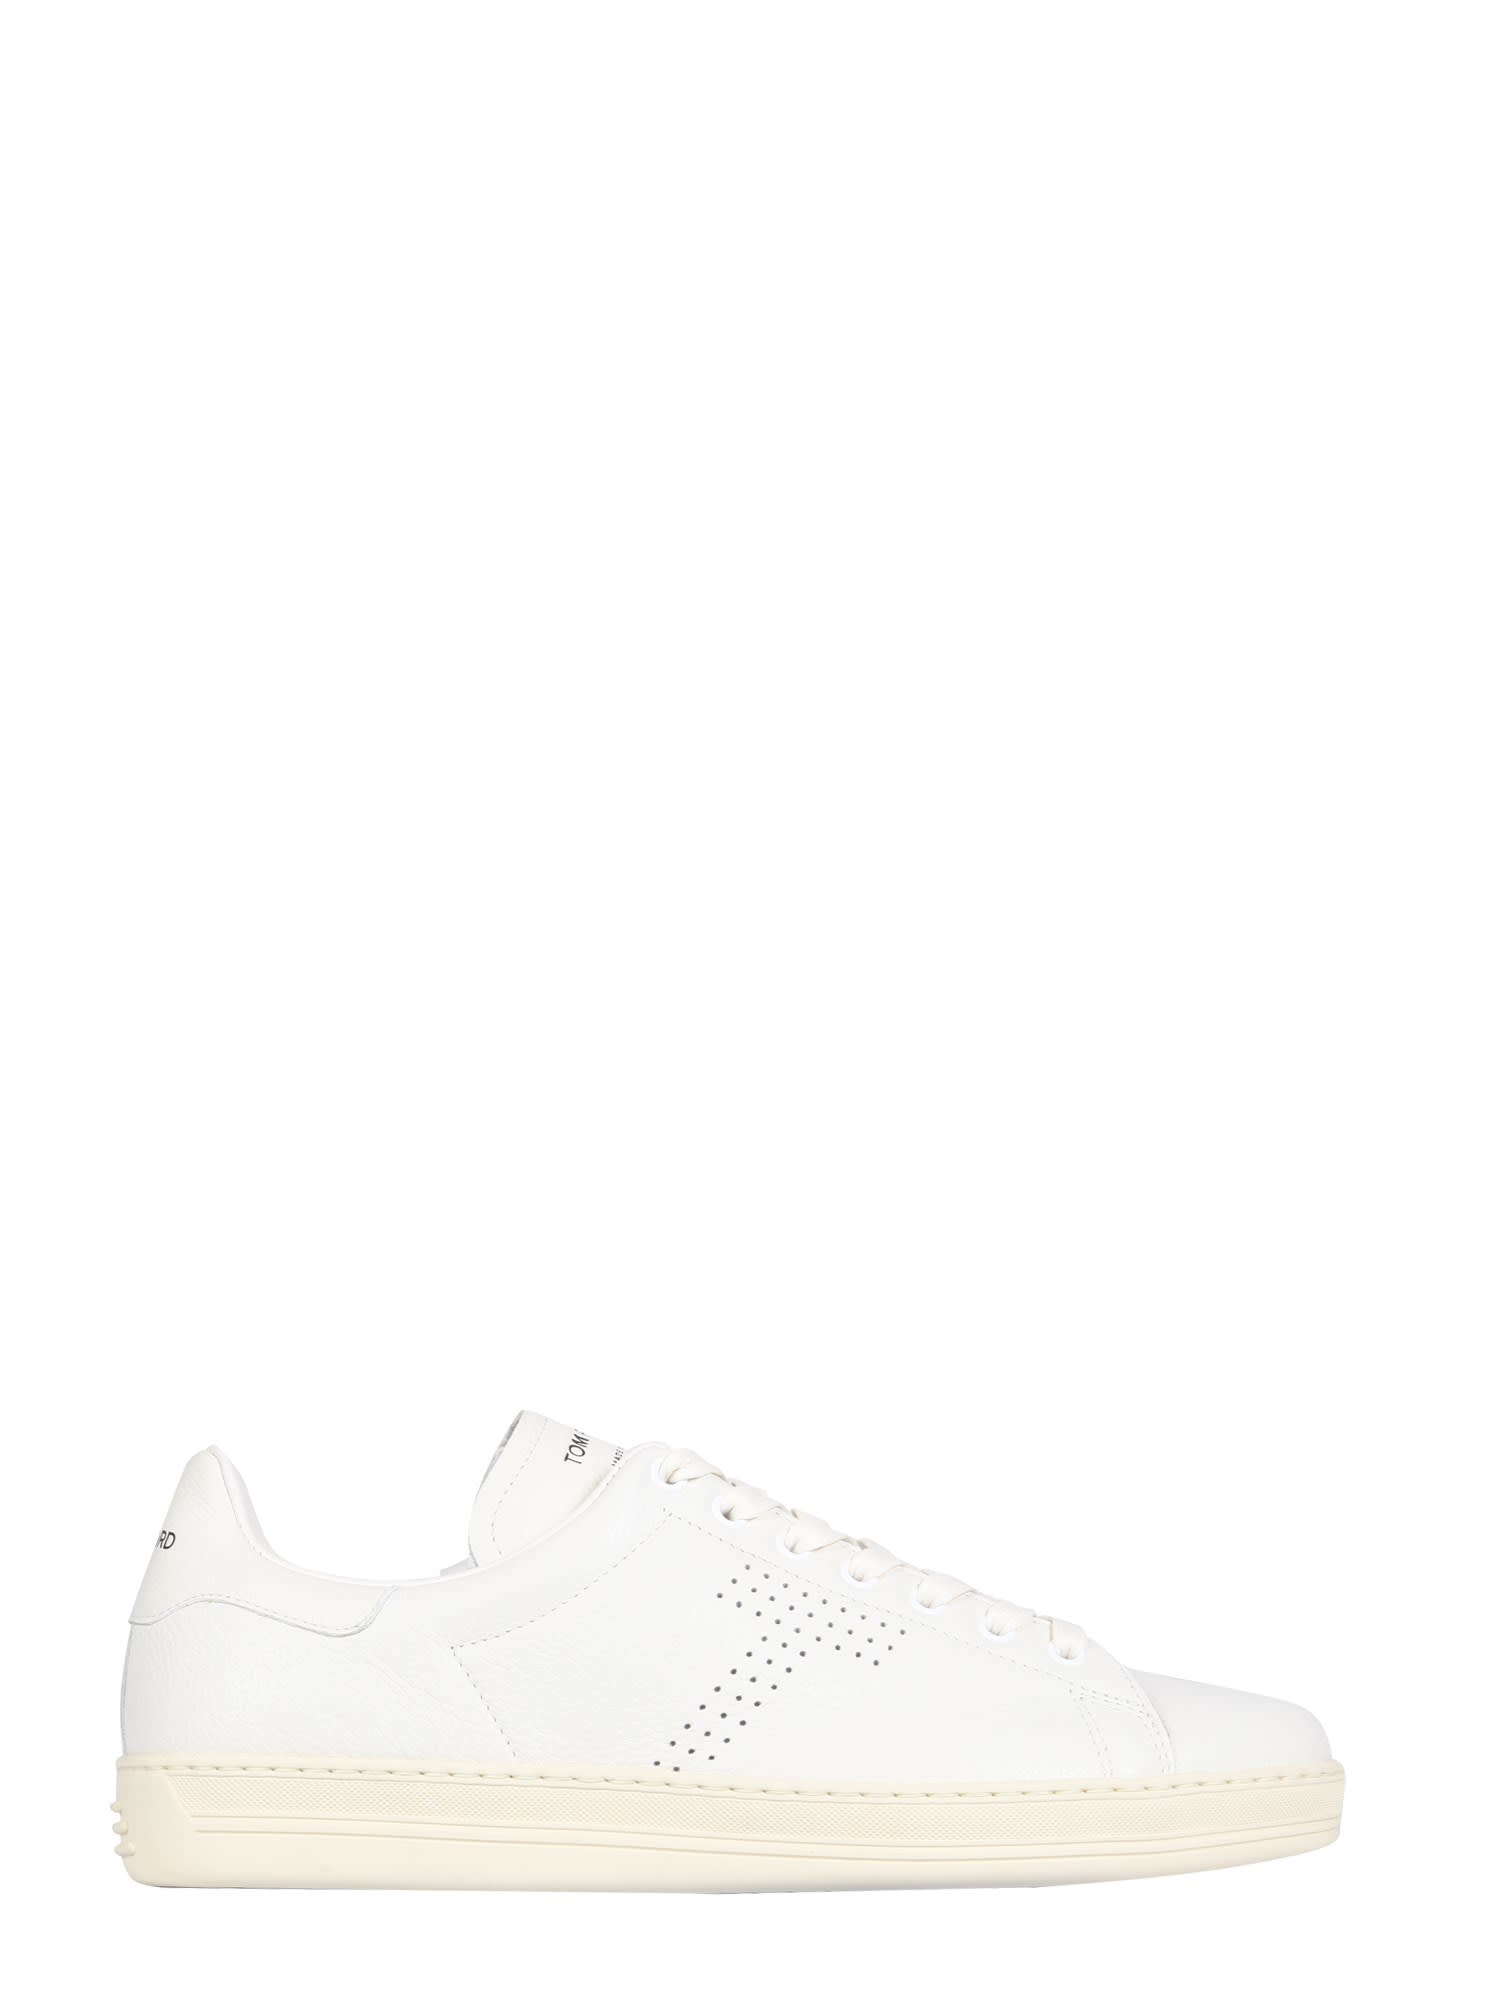 Tom Ford Low Sneakers from Italist.com US | AccuWeather Shop